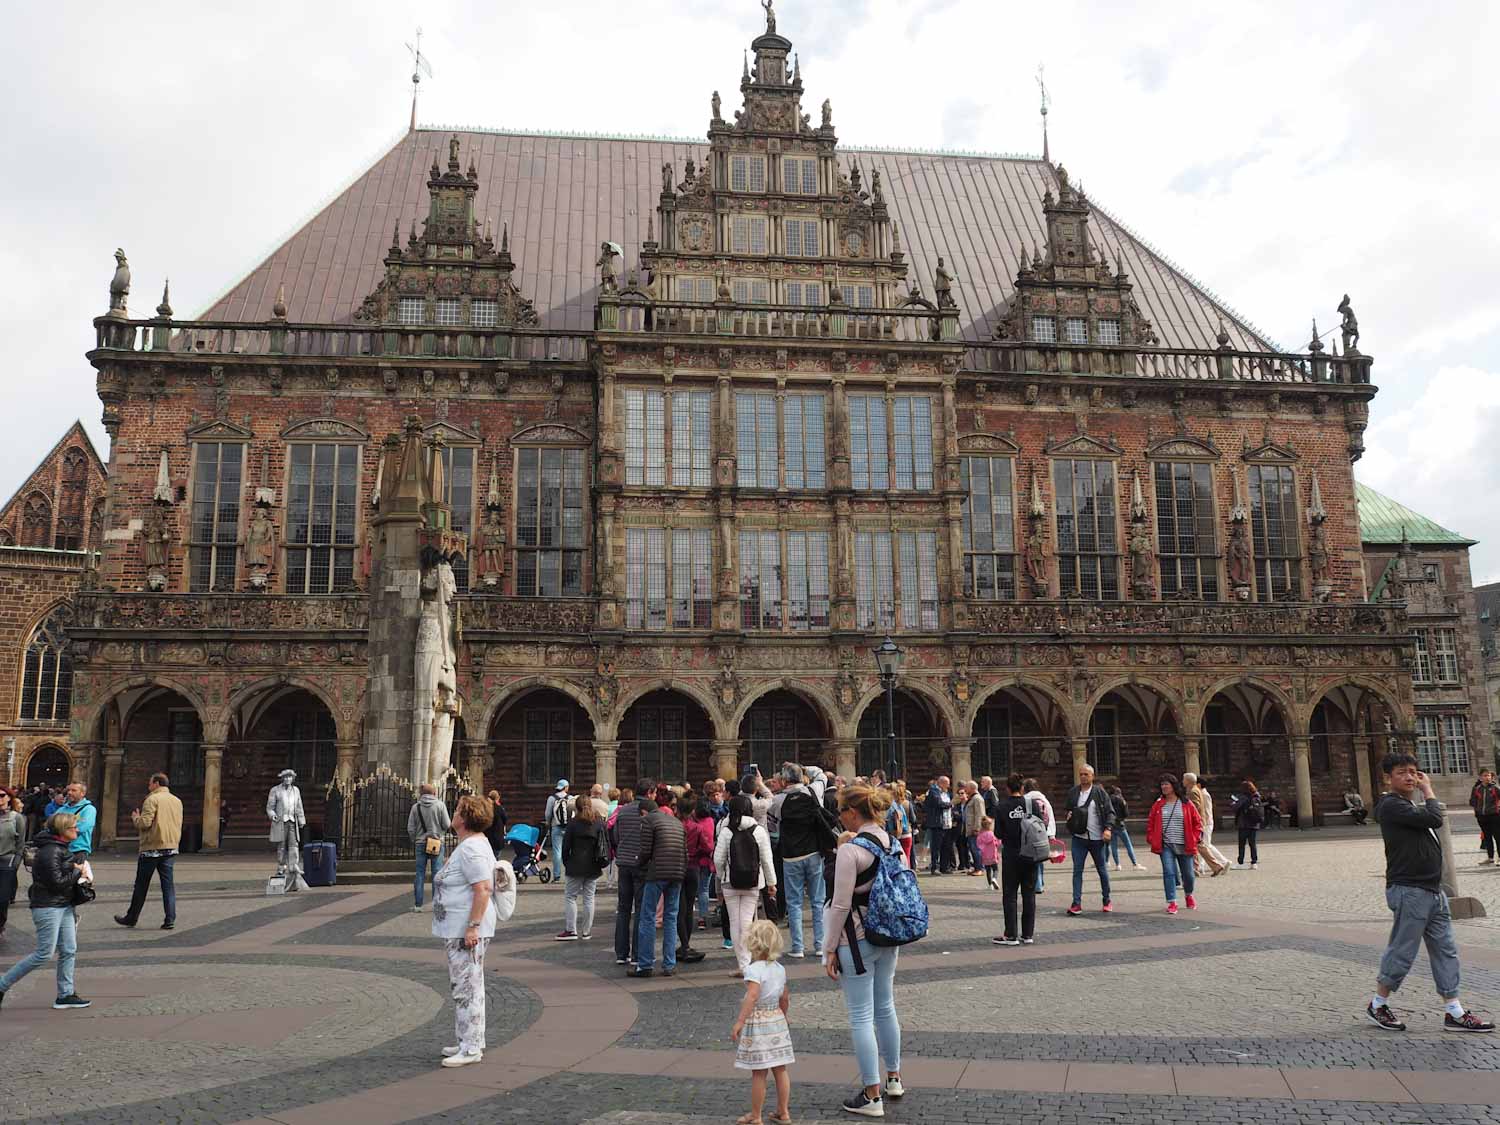 Crowds of people gathered outside a large, intricate, German town hall building